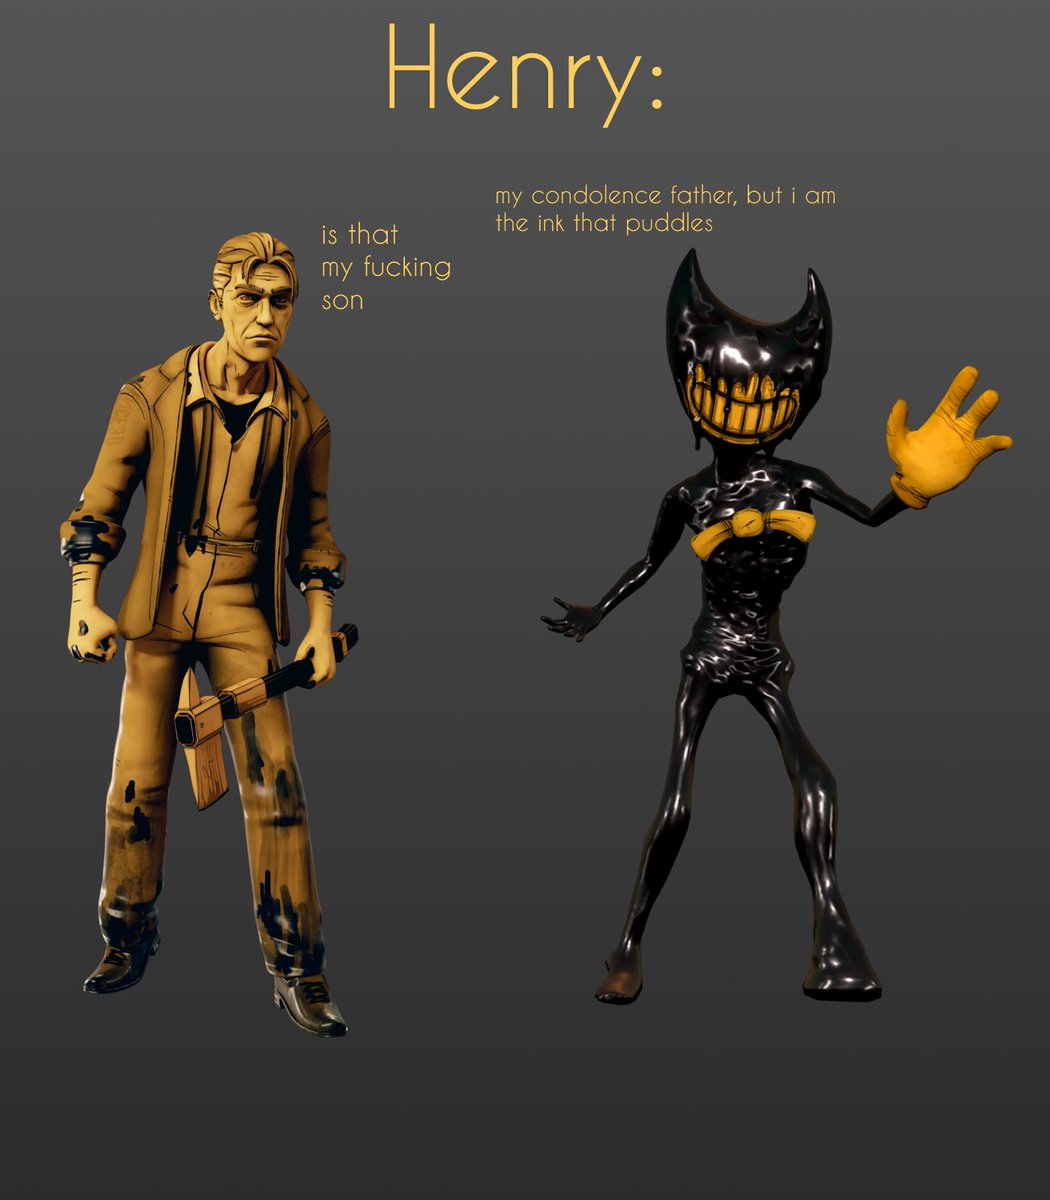 Since BATDR ink demon is the one that is his canon design I want to behold a silly little headcanon that utilizes Ink Bendy's design...

Henry is the only one who sees the Ink Demon as Ink bendy because that's just his little guy that's his son😔